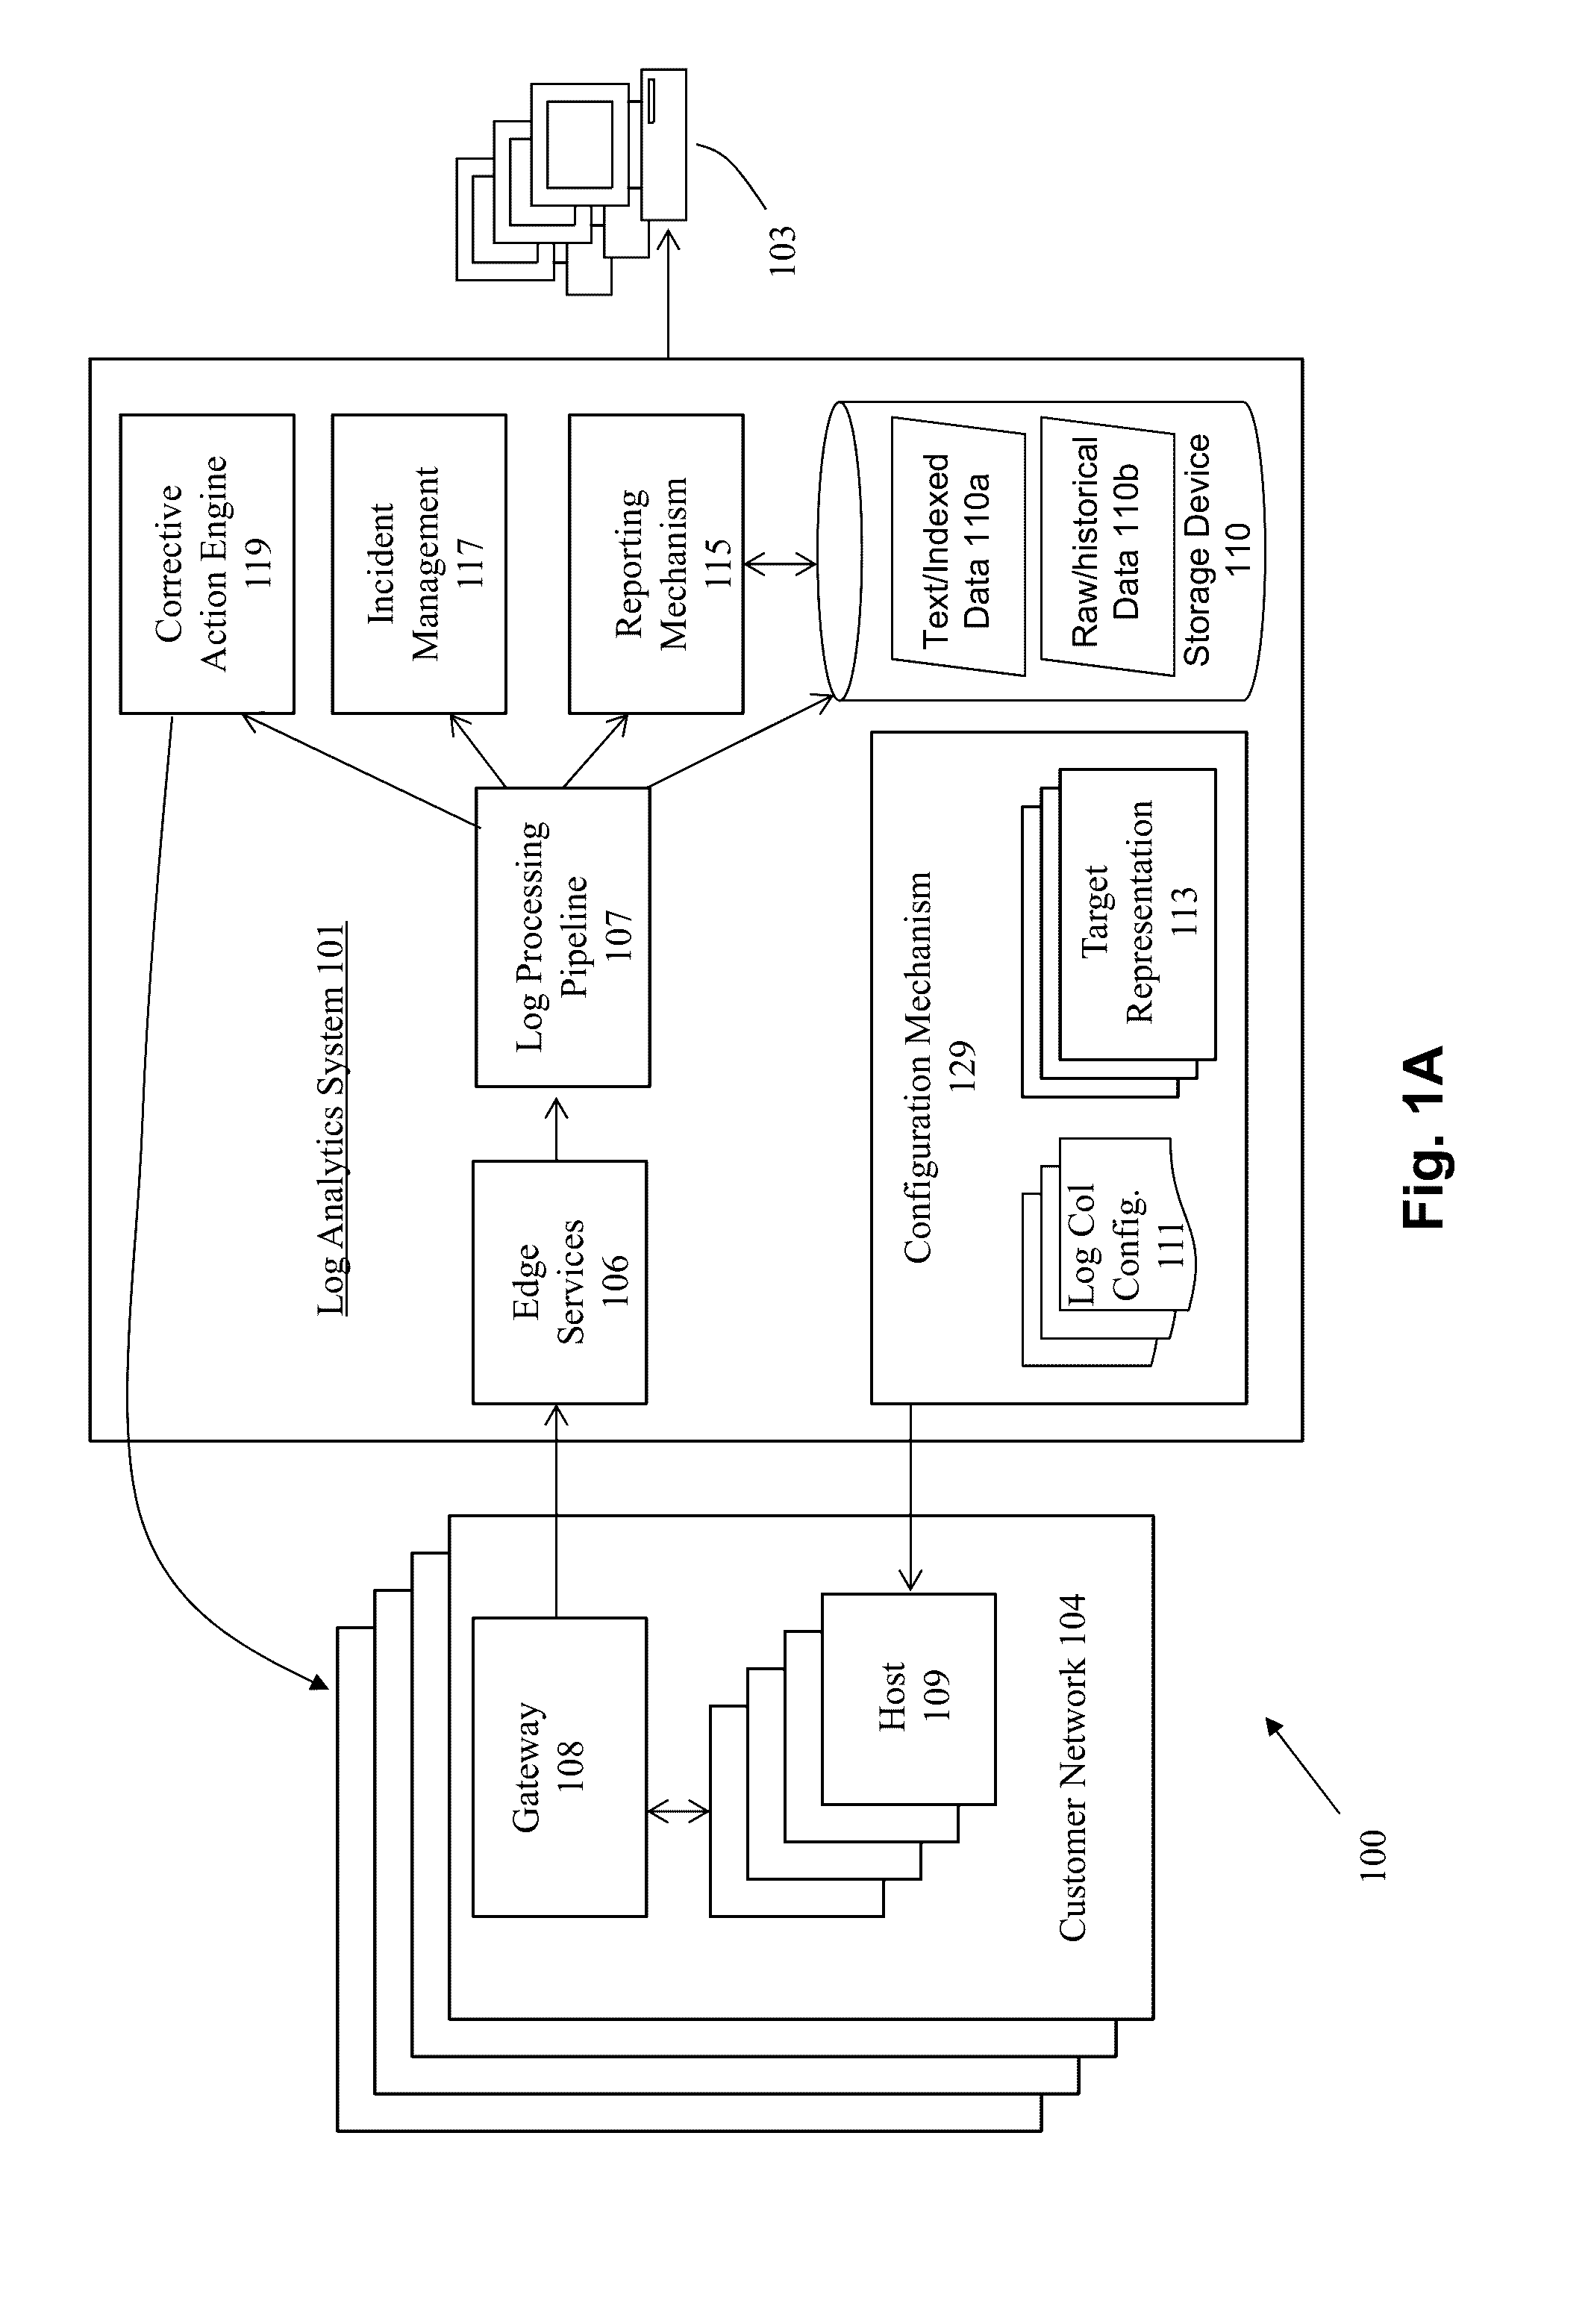 Method and system for parameterizing log file location assignments for a log analytics system